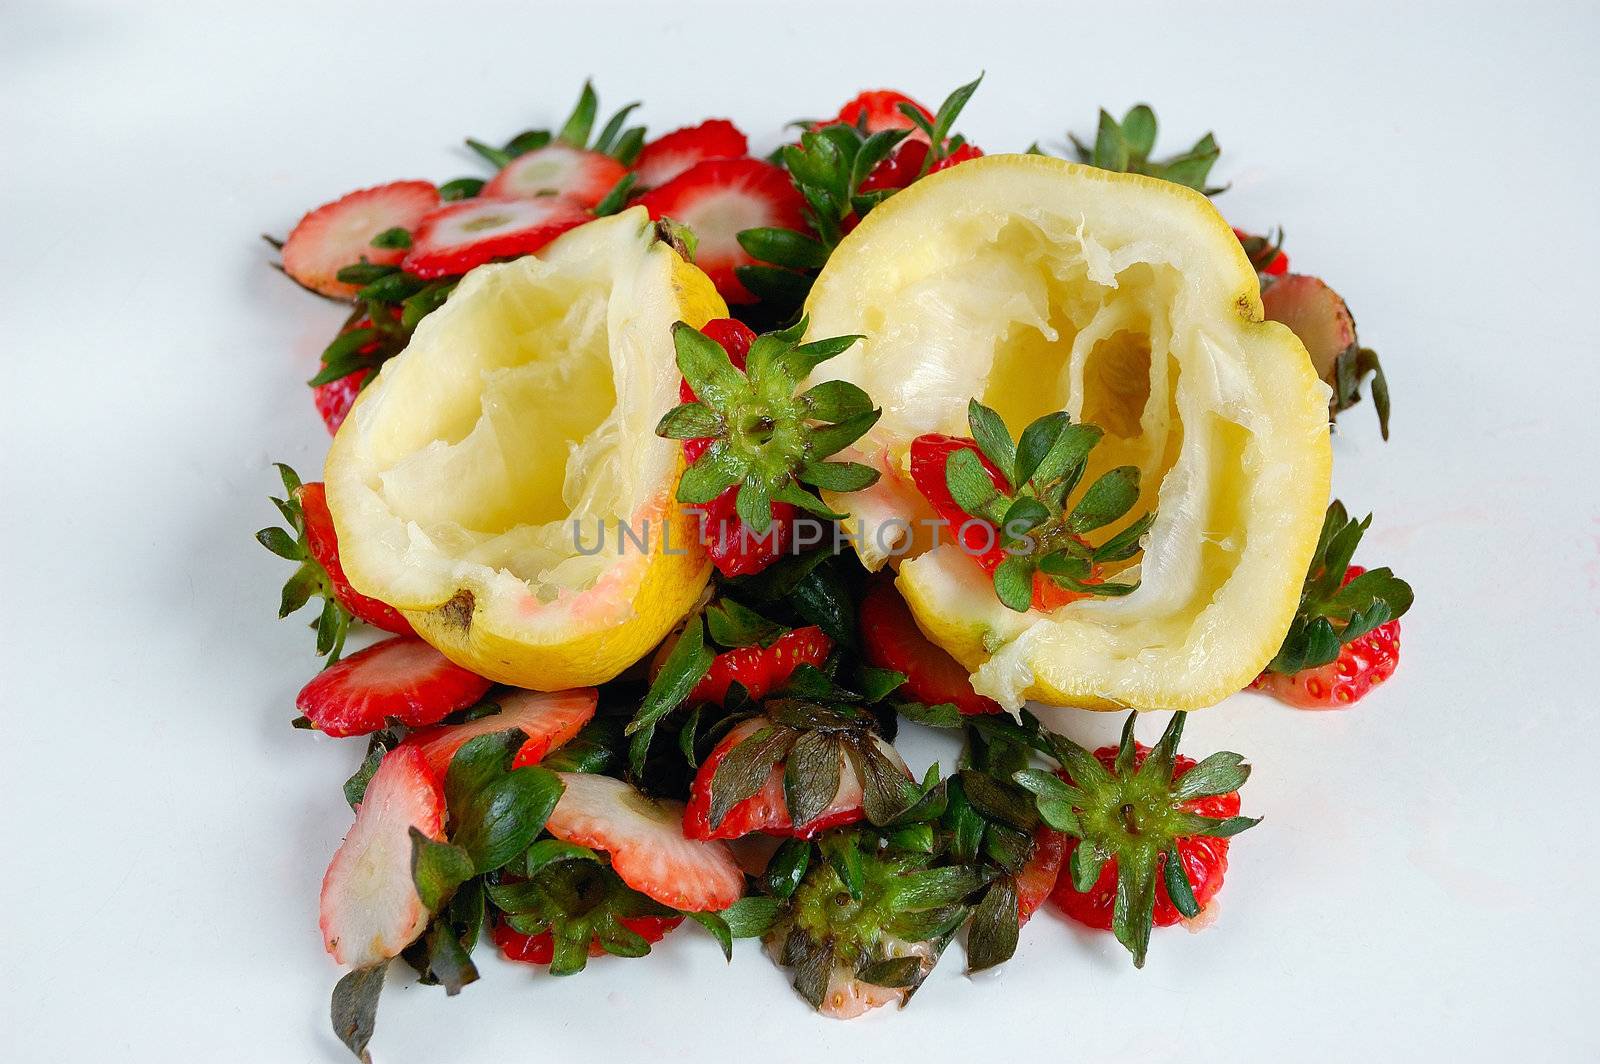 fruits (lemons and strawberries) scraps on a table